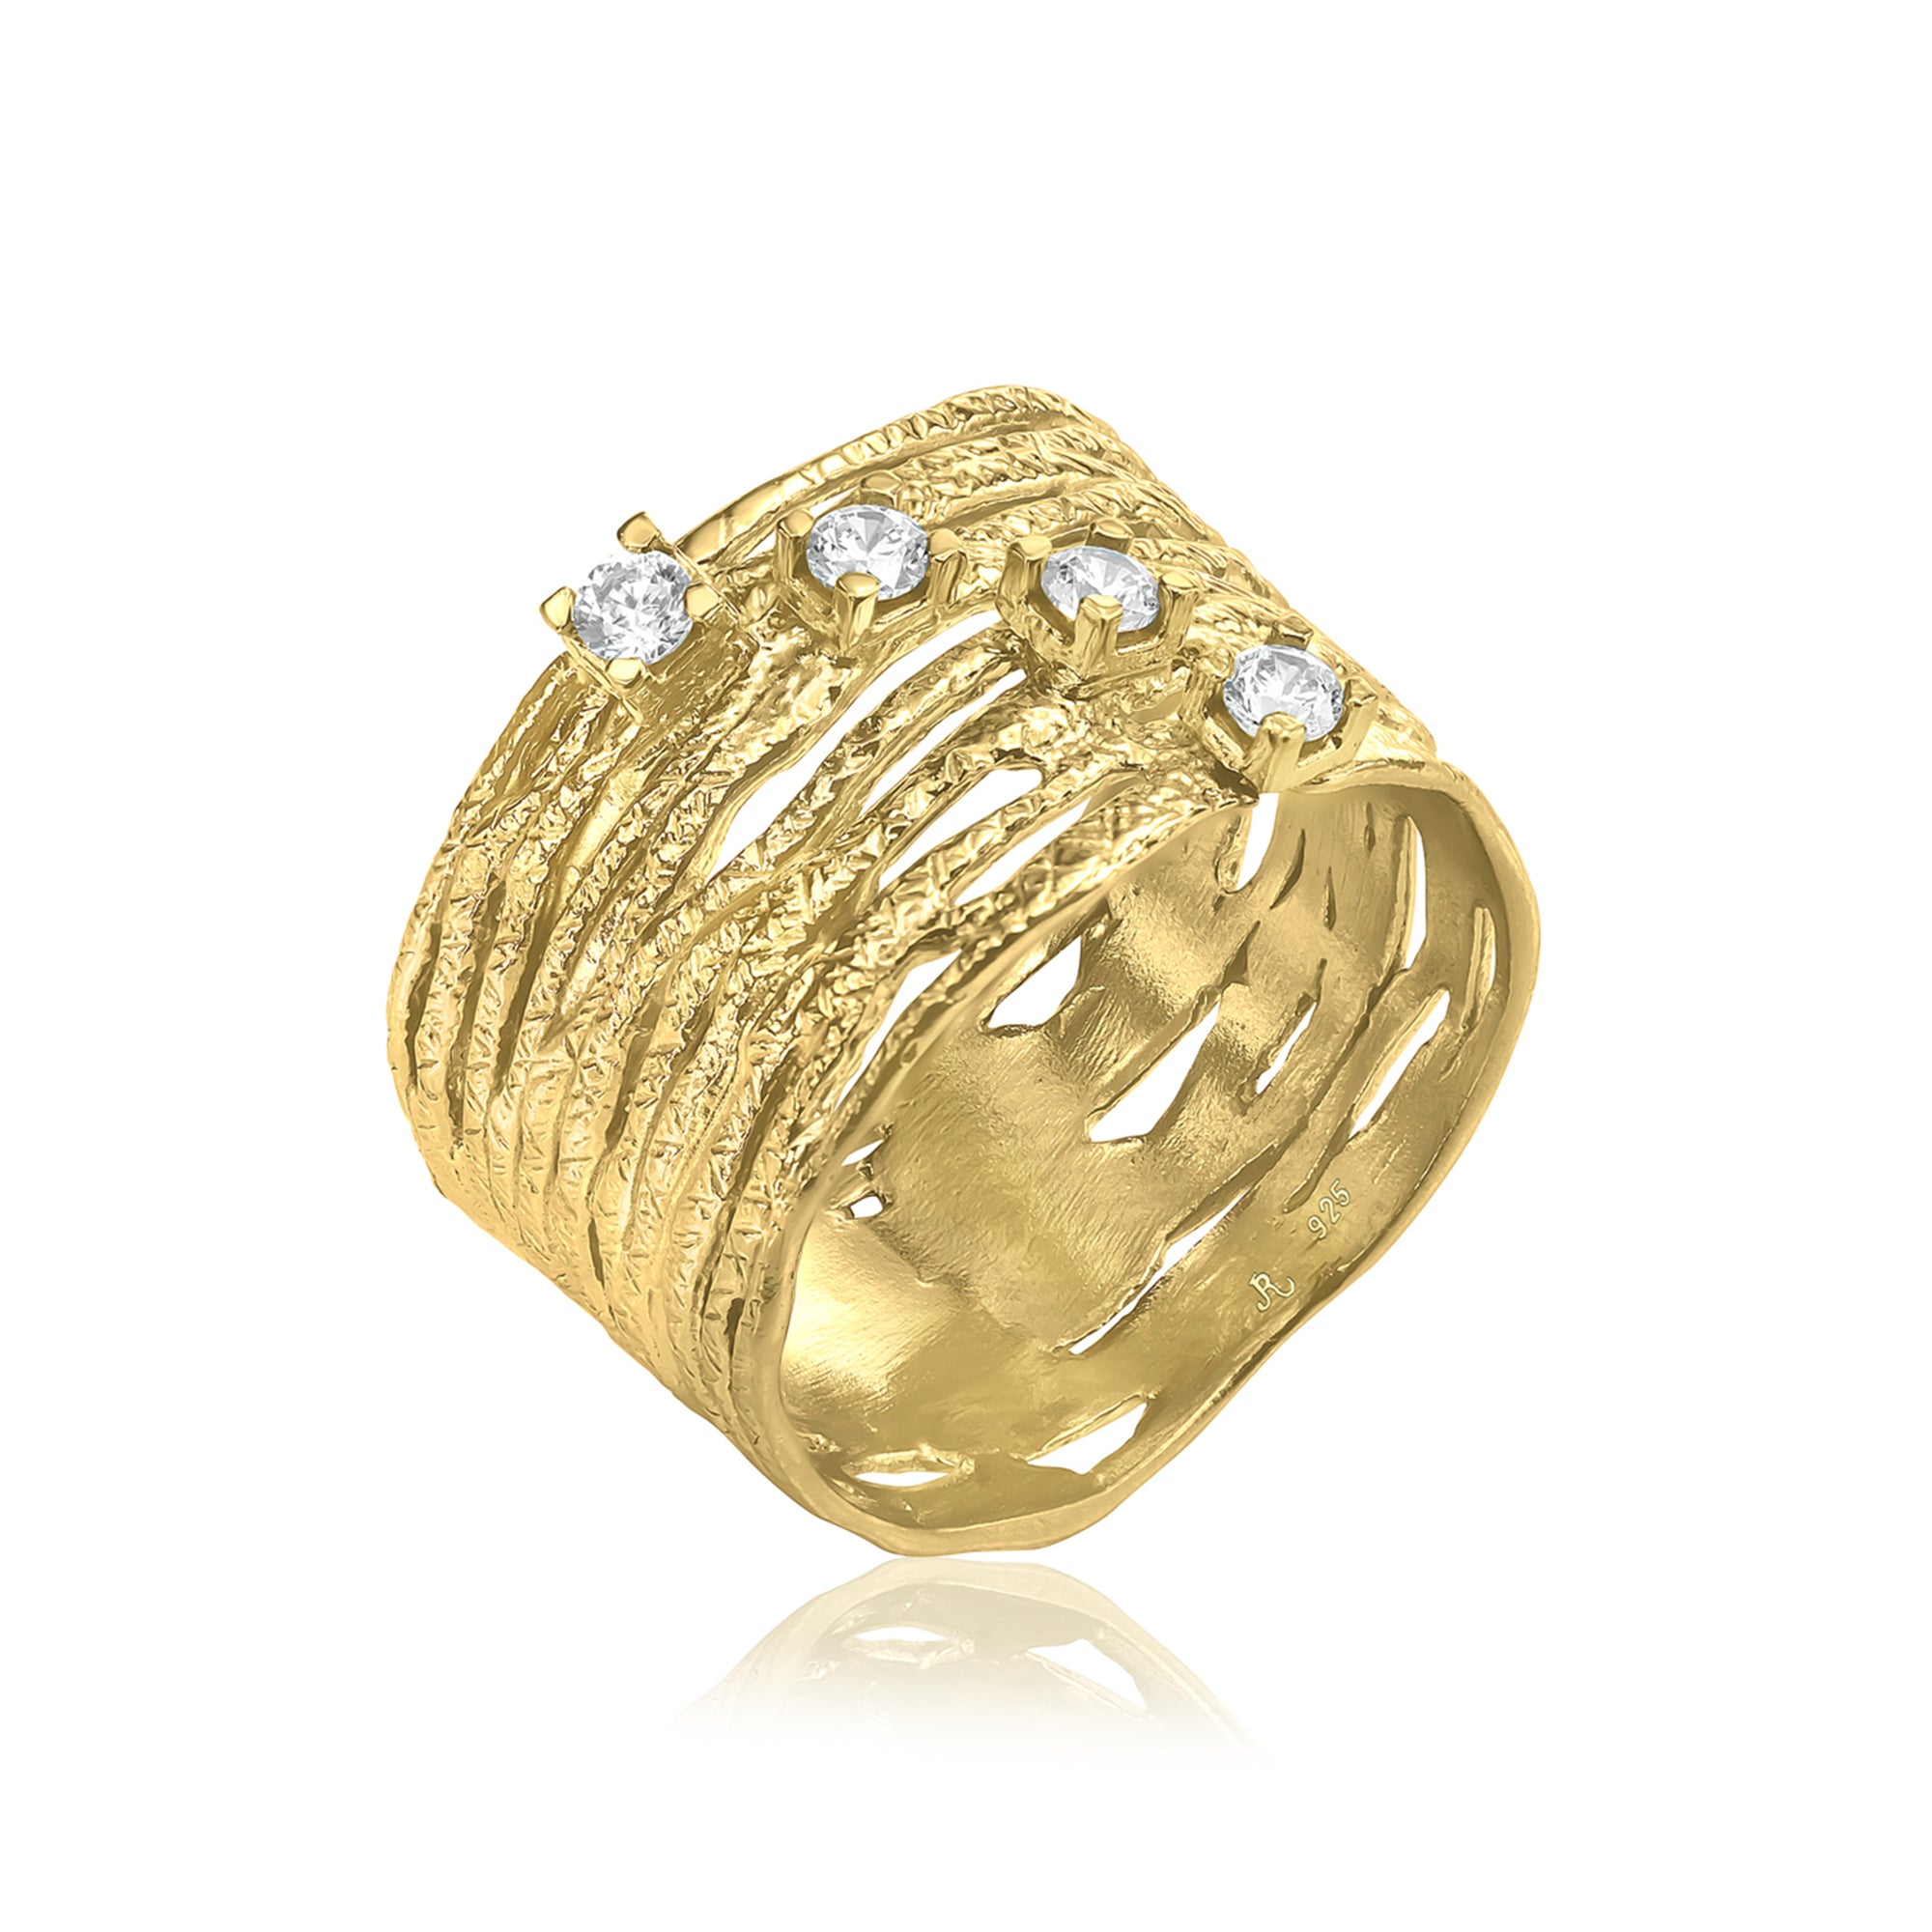 Textured 14K Gold Over Sterling Silver CZ Ring